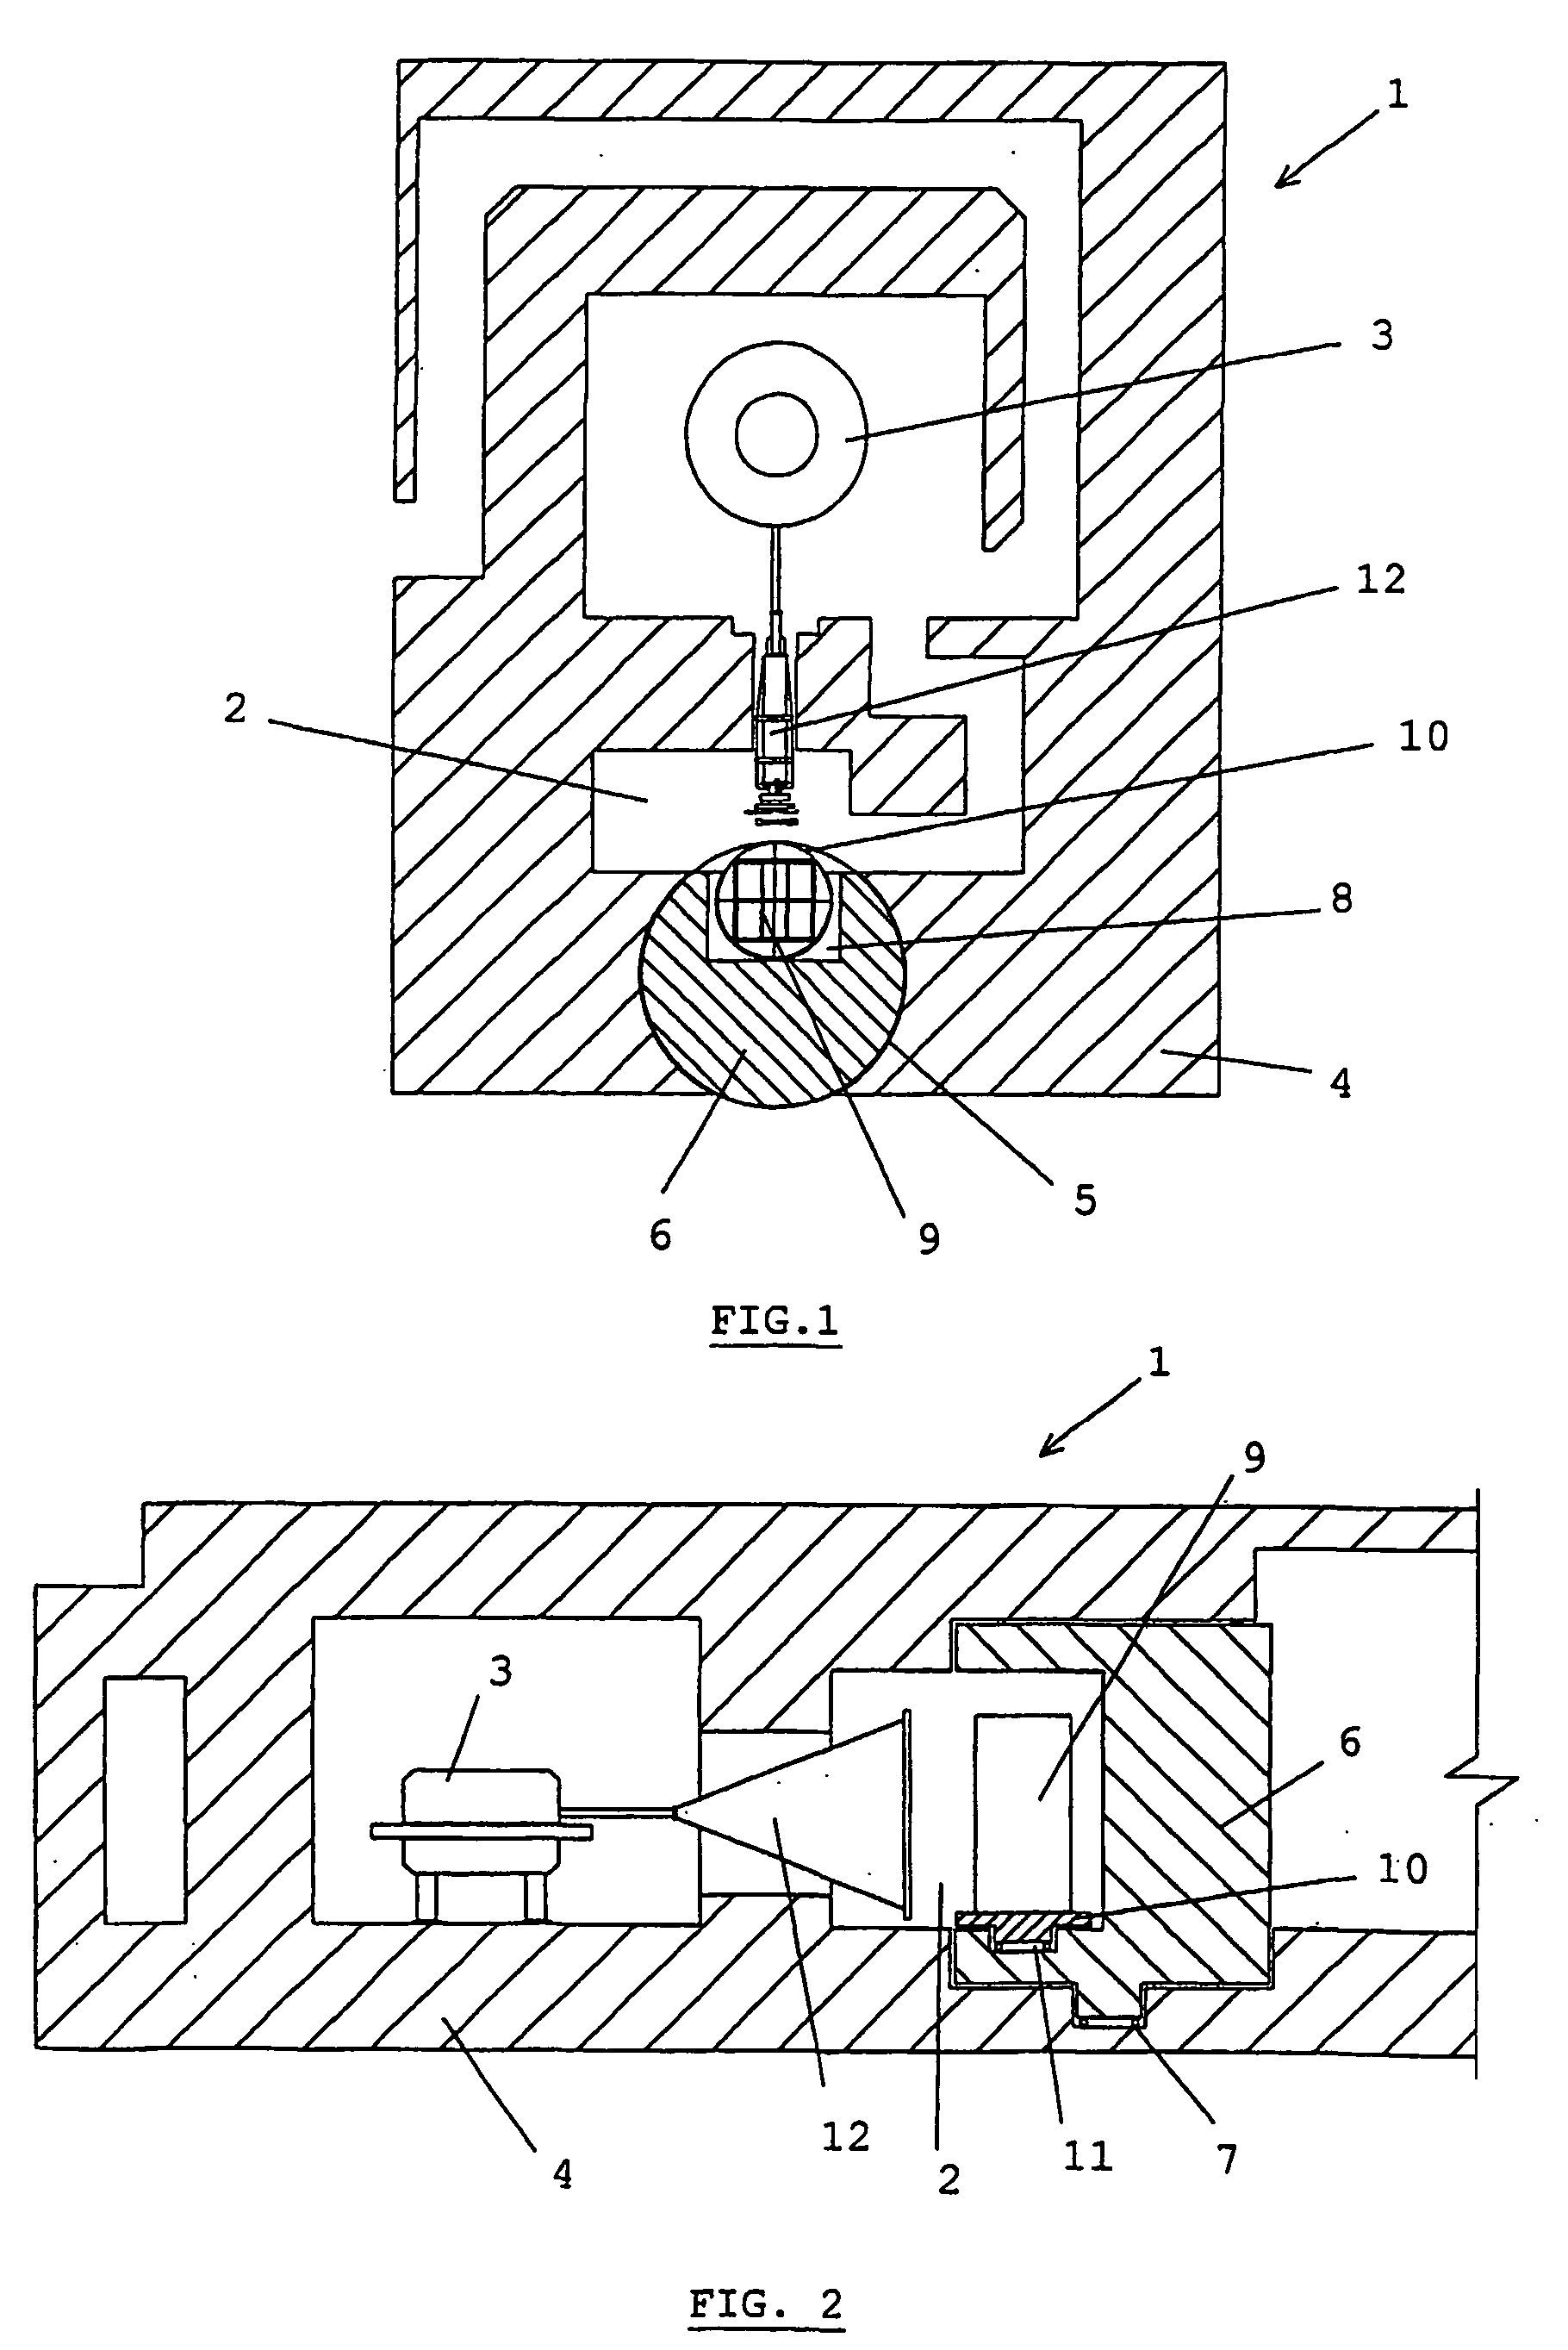 Apparatus and process for irradiating product pallets